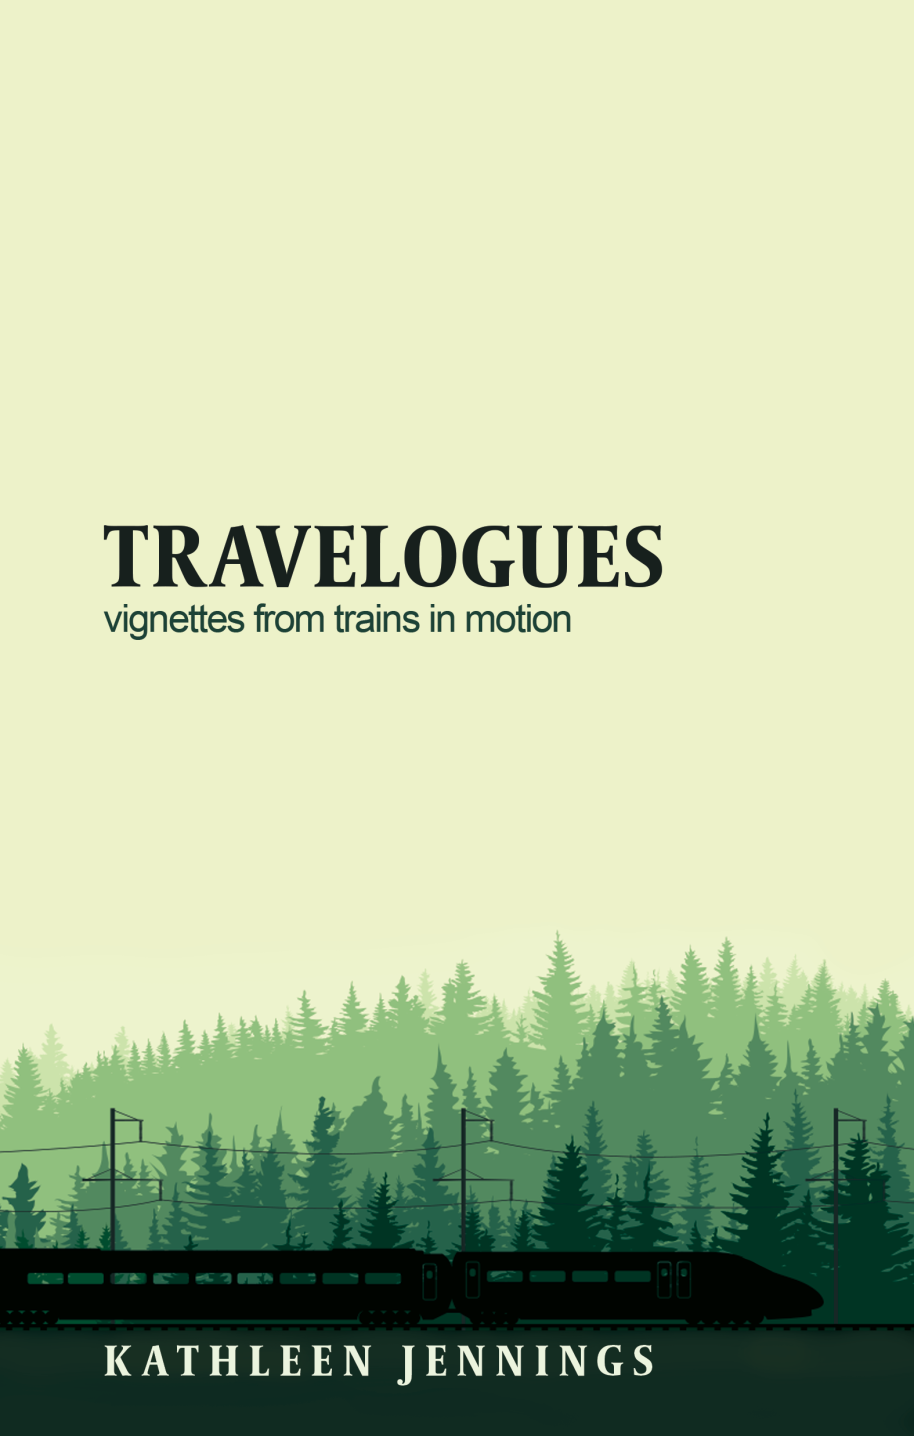 The cover of Kathleen Jennings's book, Travelogues. It features a train rushing past a pine forest.